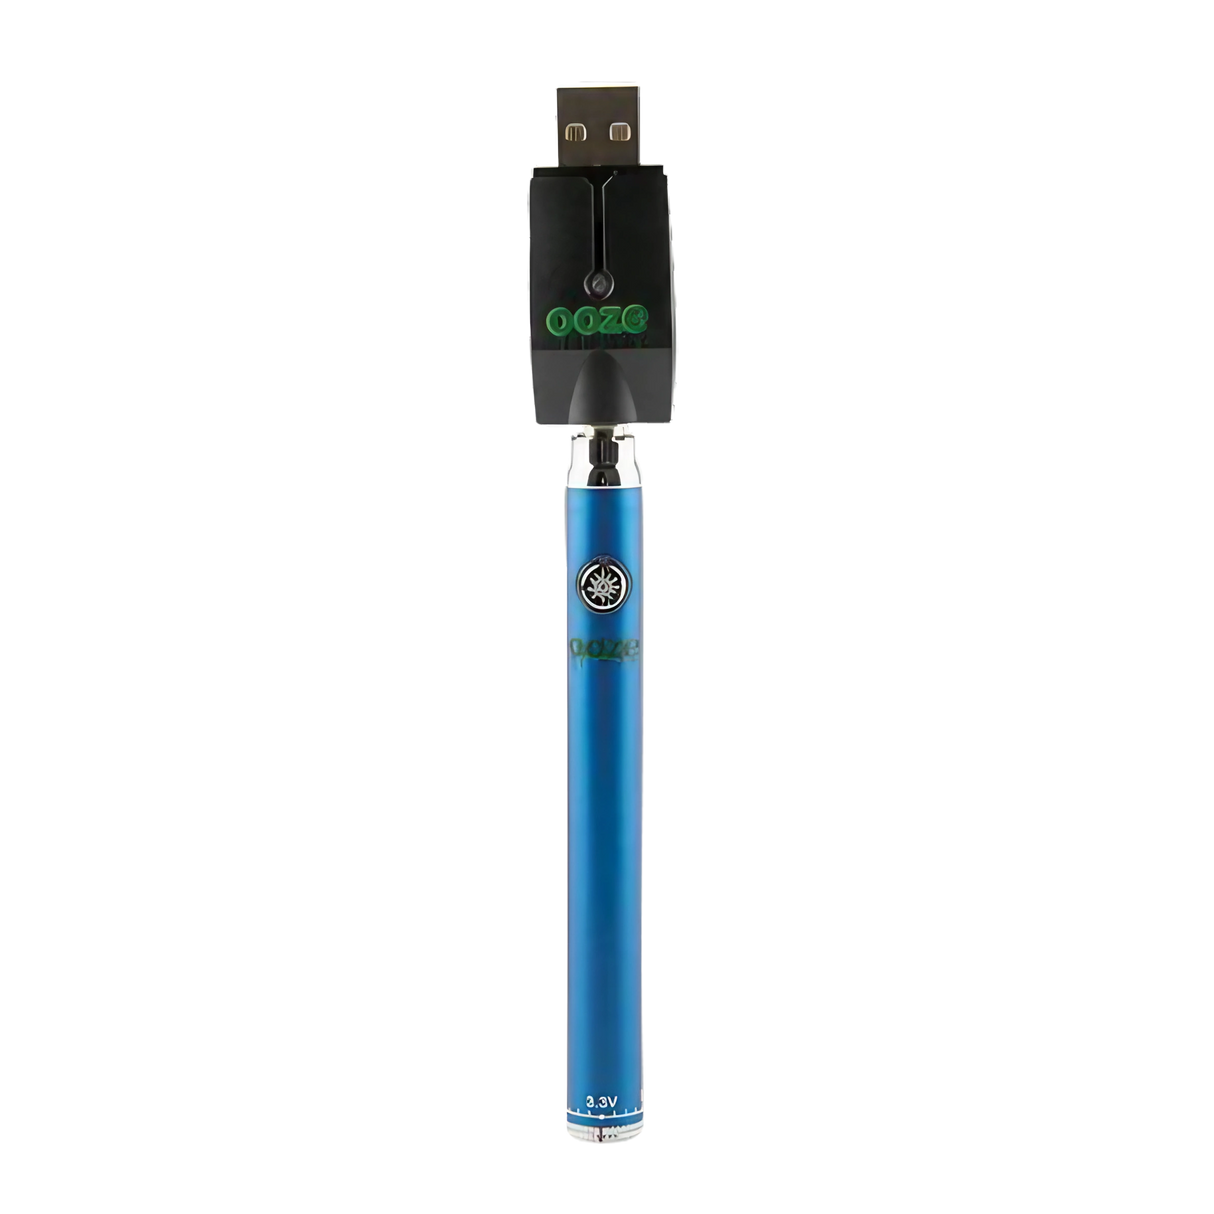 Ooze Slim Twist Battery in Blue with USB Charger, 510 Thread, Front View